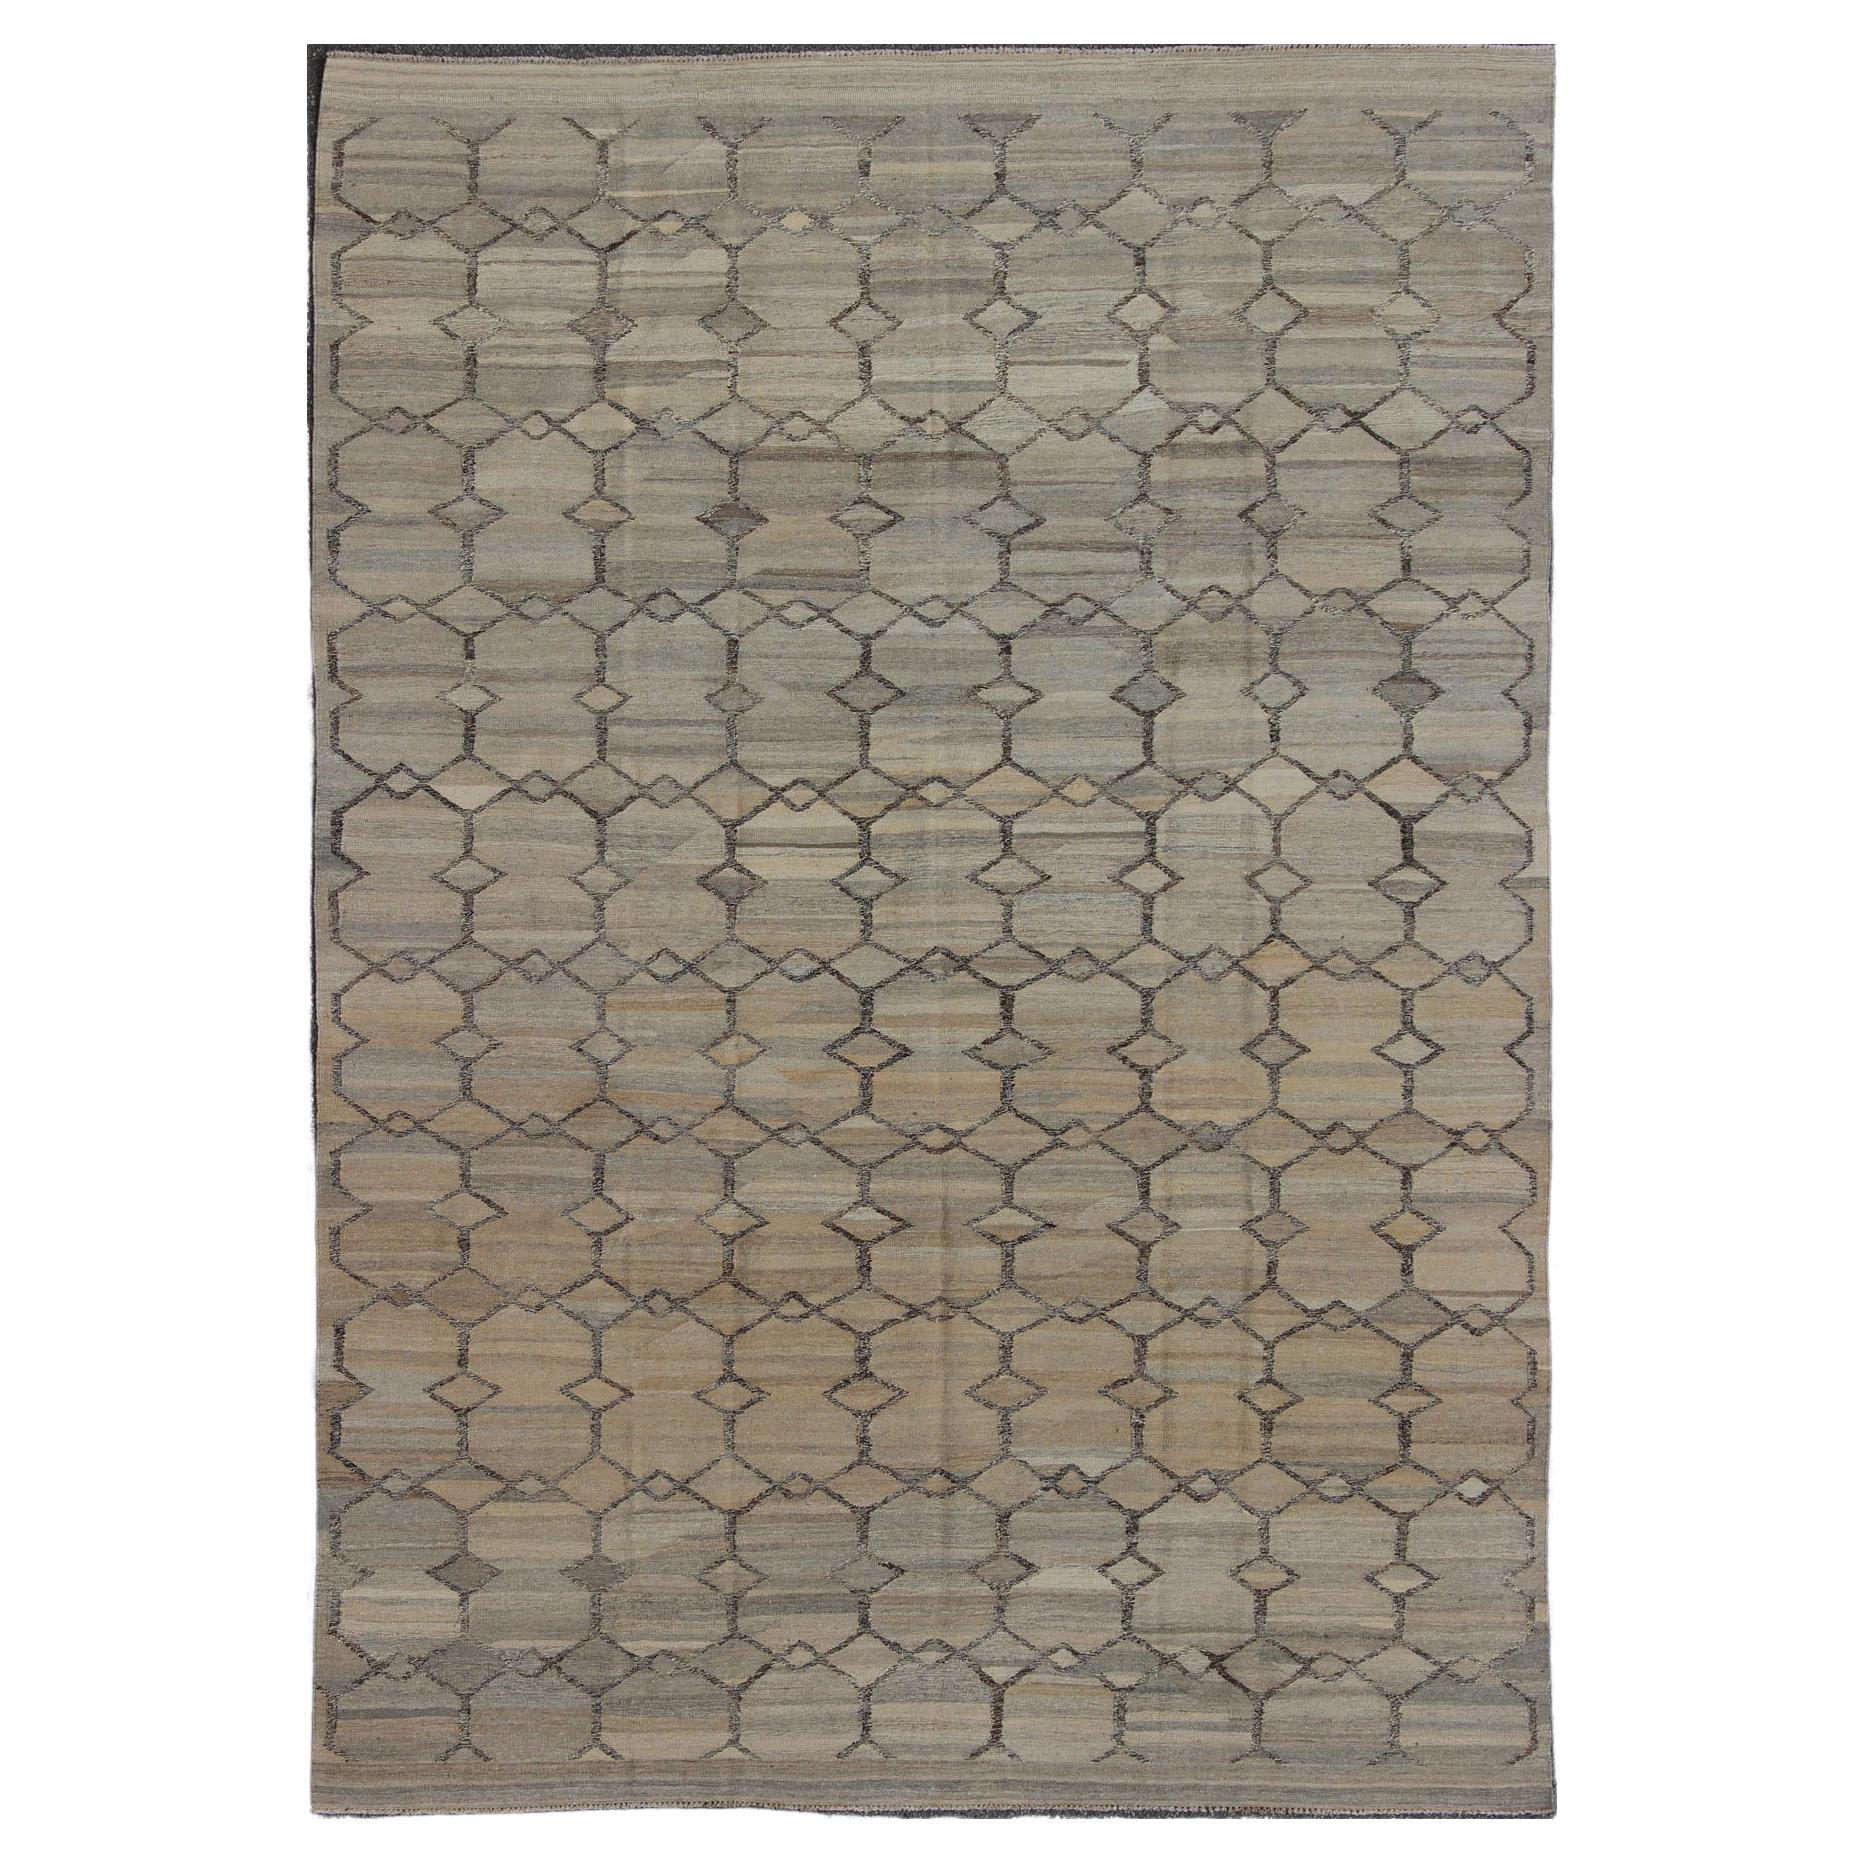 Modern Kilim Rug in Shades of Grey, Silver, Charcoal and Gray